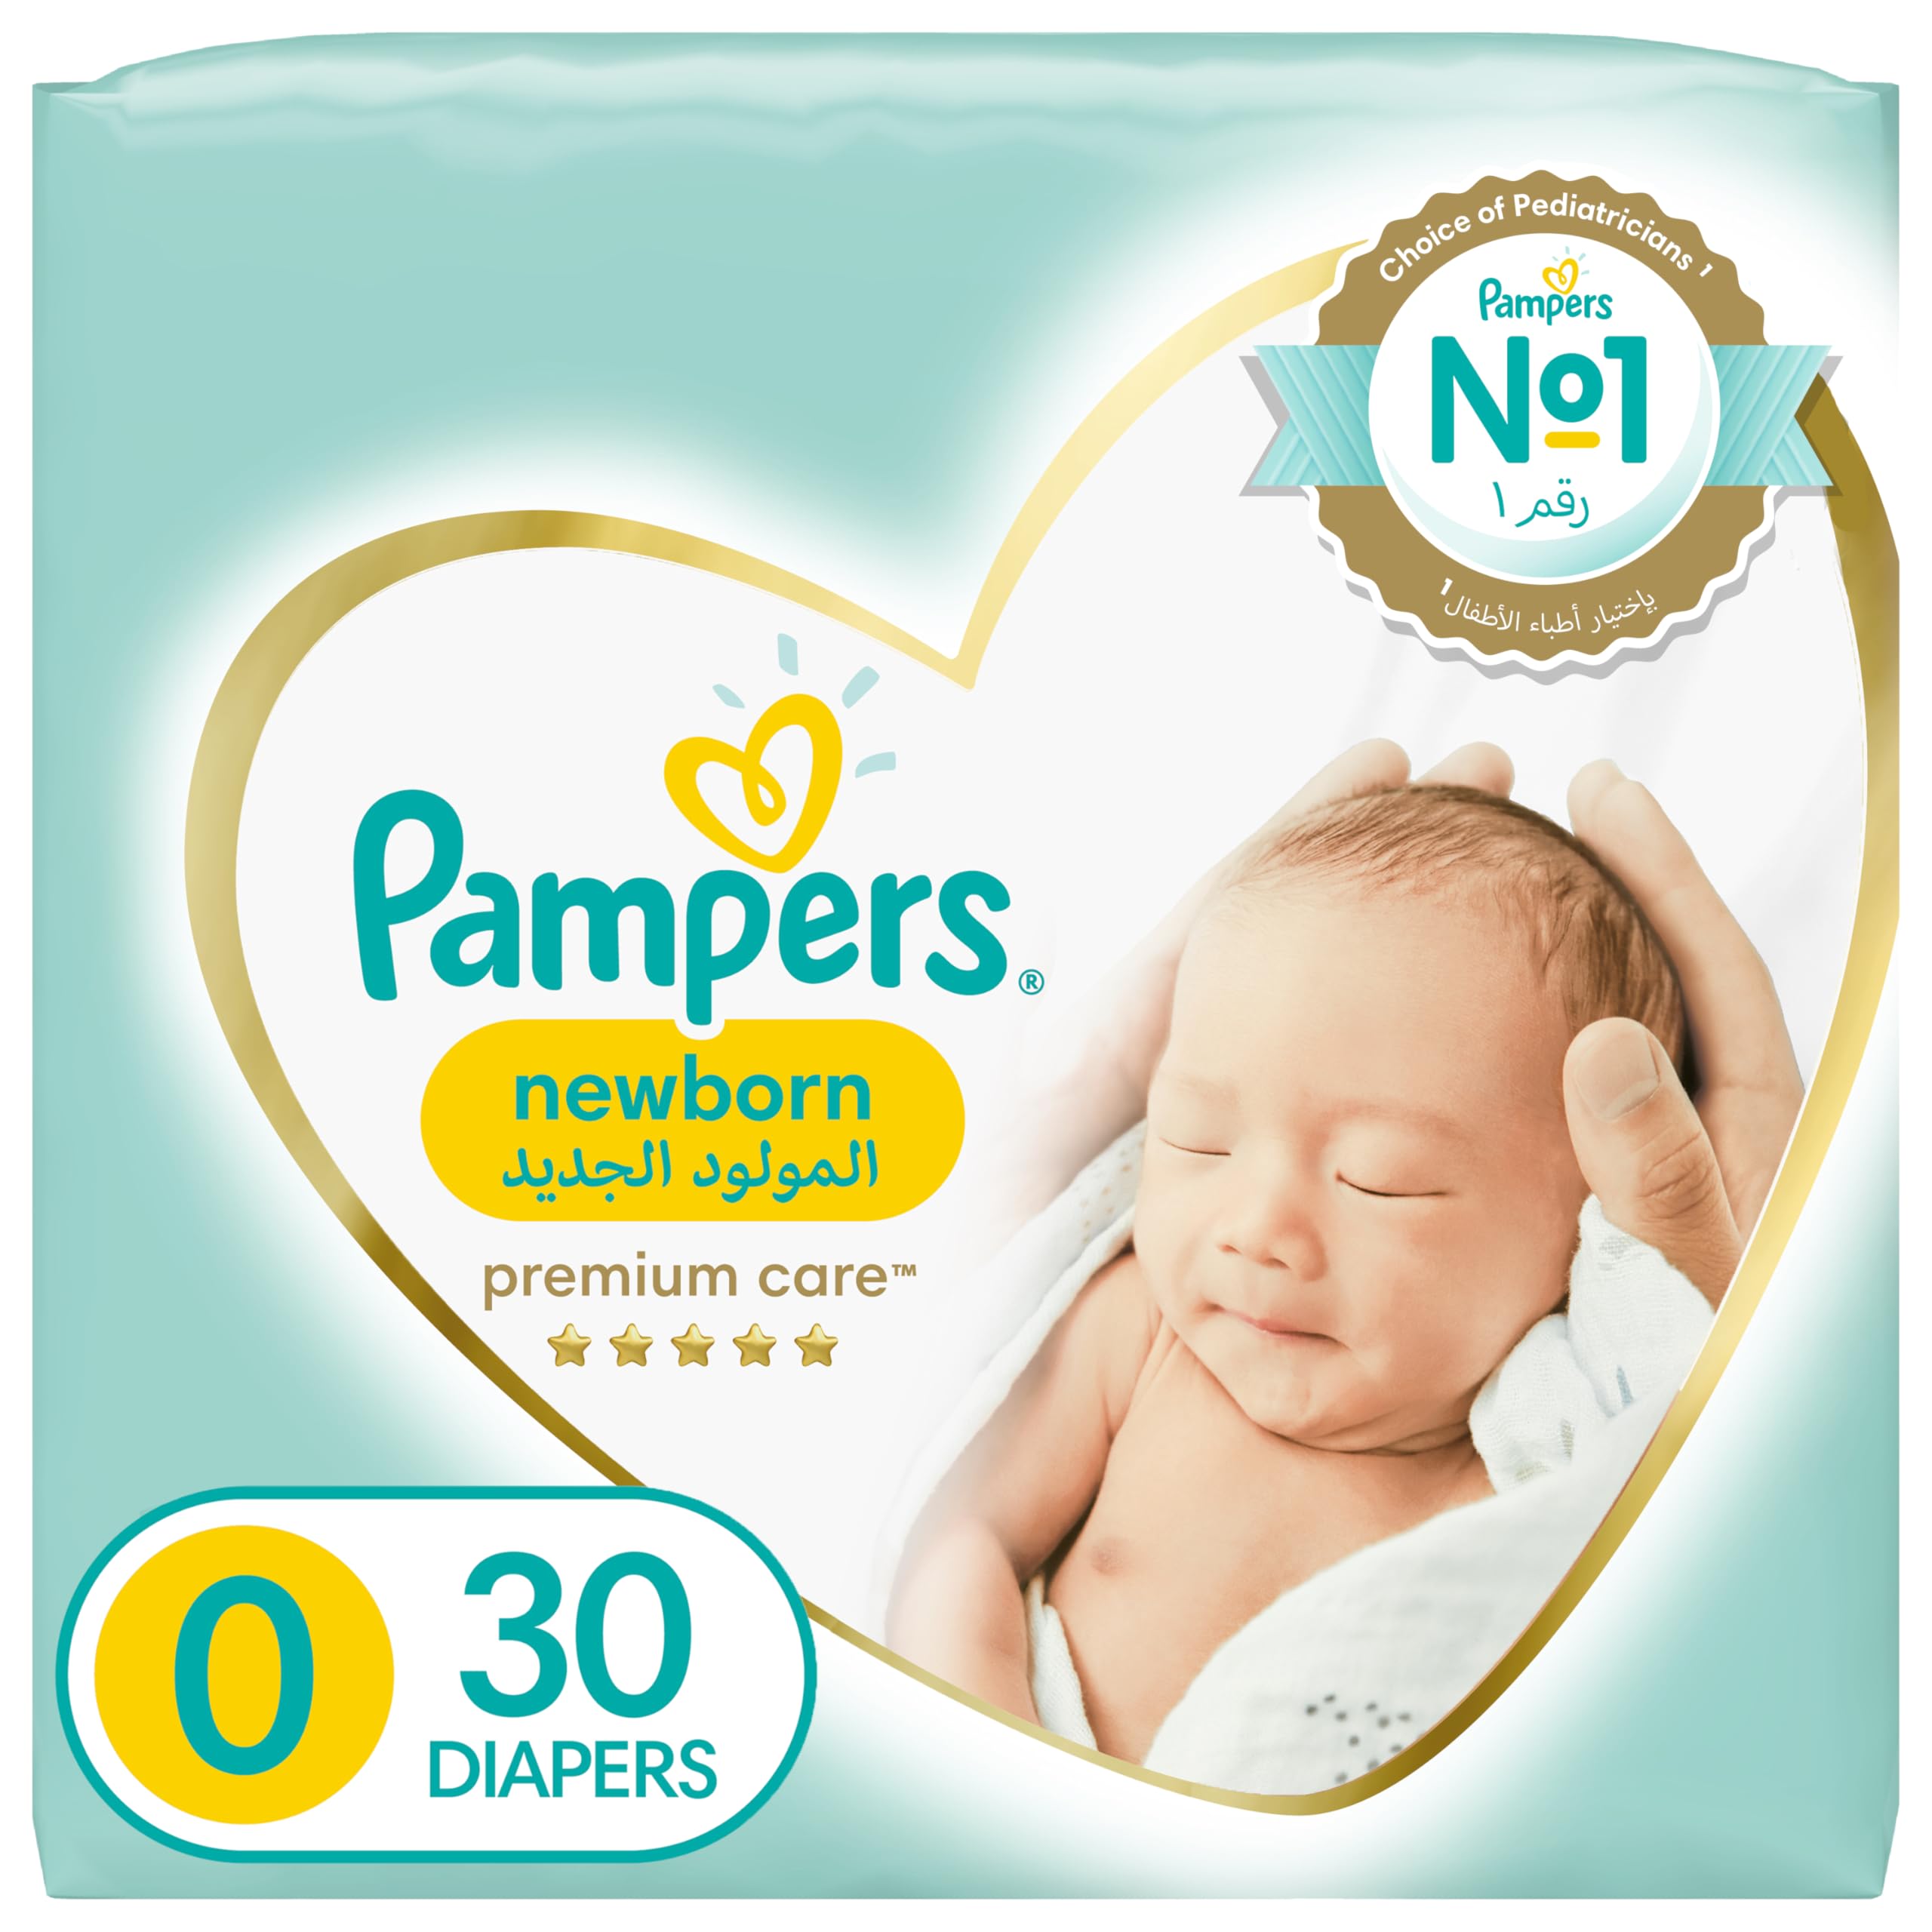 raccolta pampers